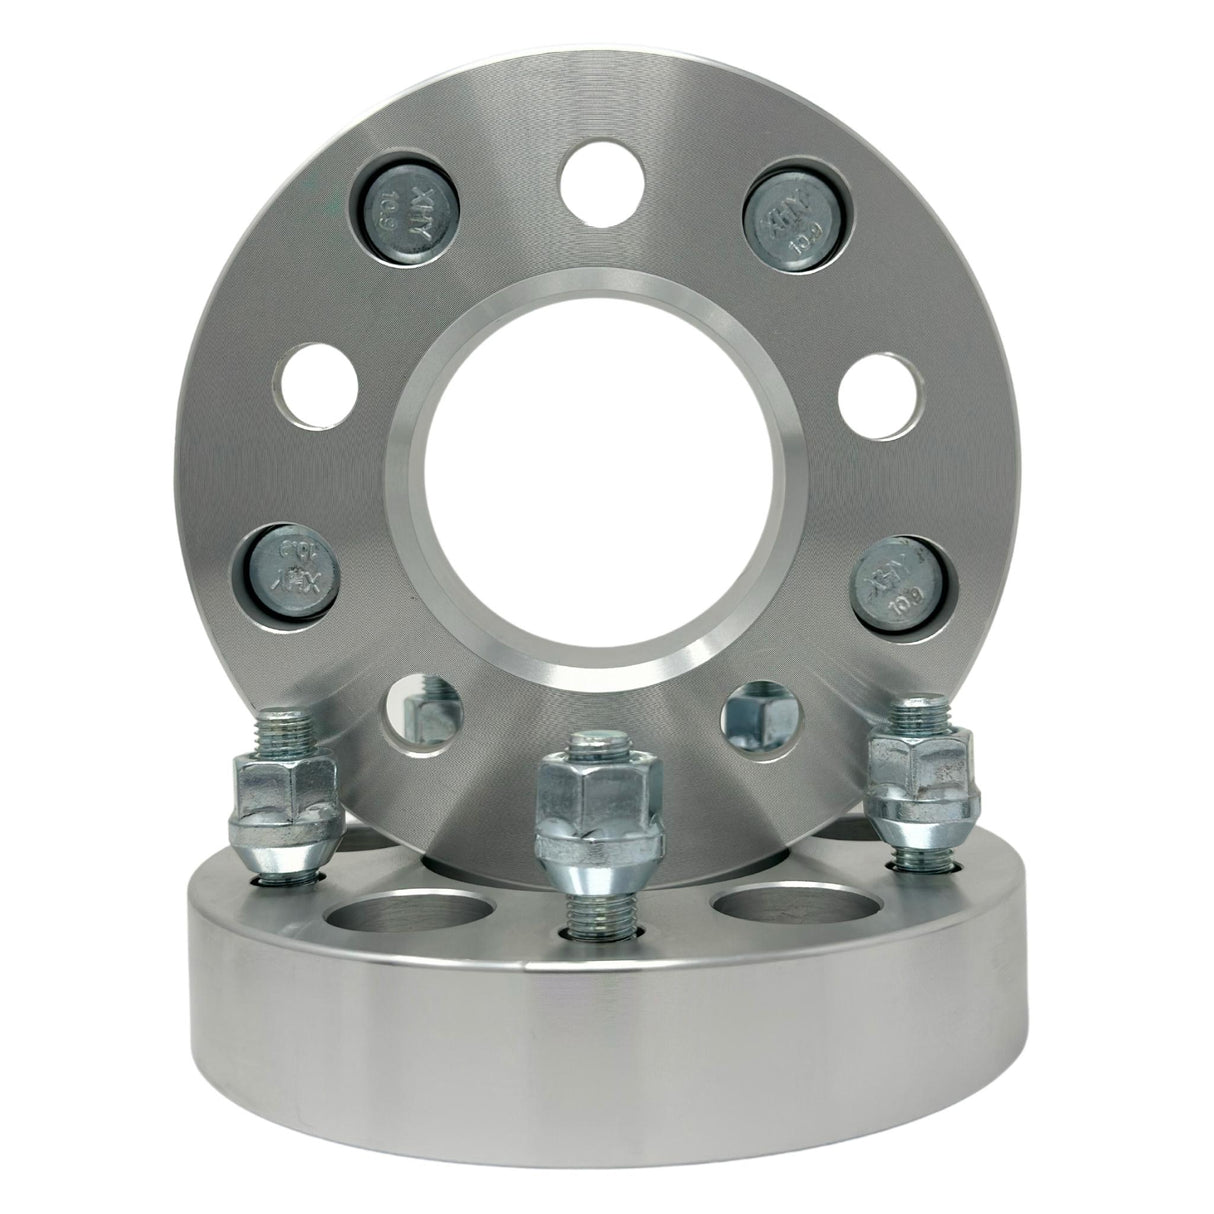 5x120.7 to 5x114.3 Wheel Adapters 1" Inch (25mm) 12x1.5 Studs & Lug Nuts 74mm Center Bore | 5x4.75 to 5x4.5 spacers